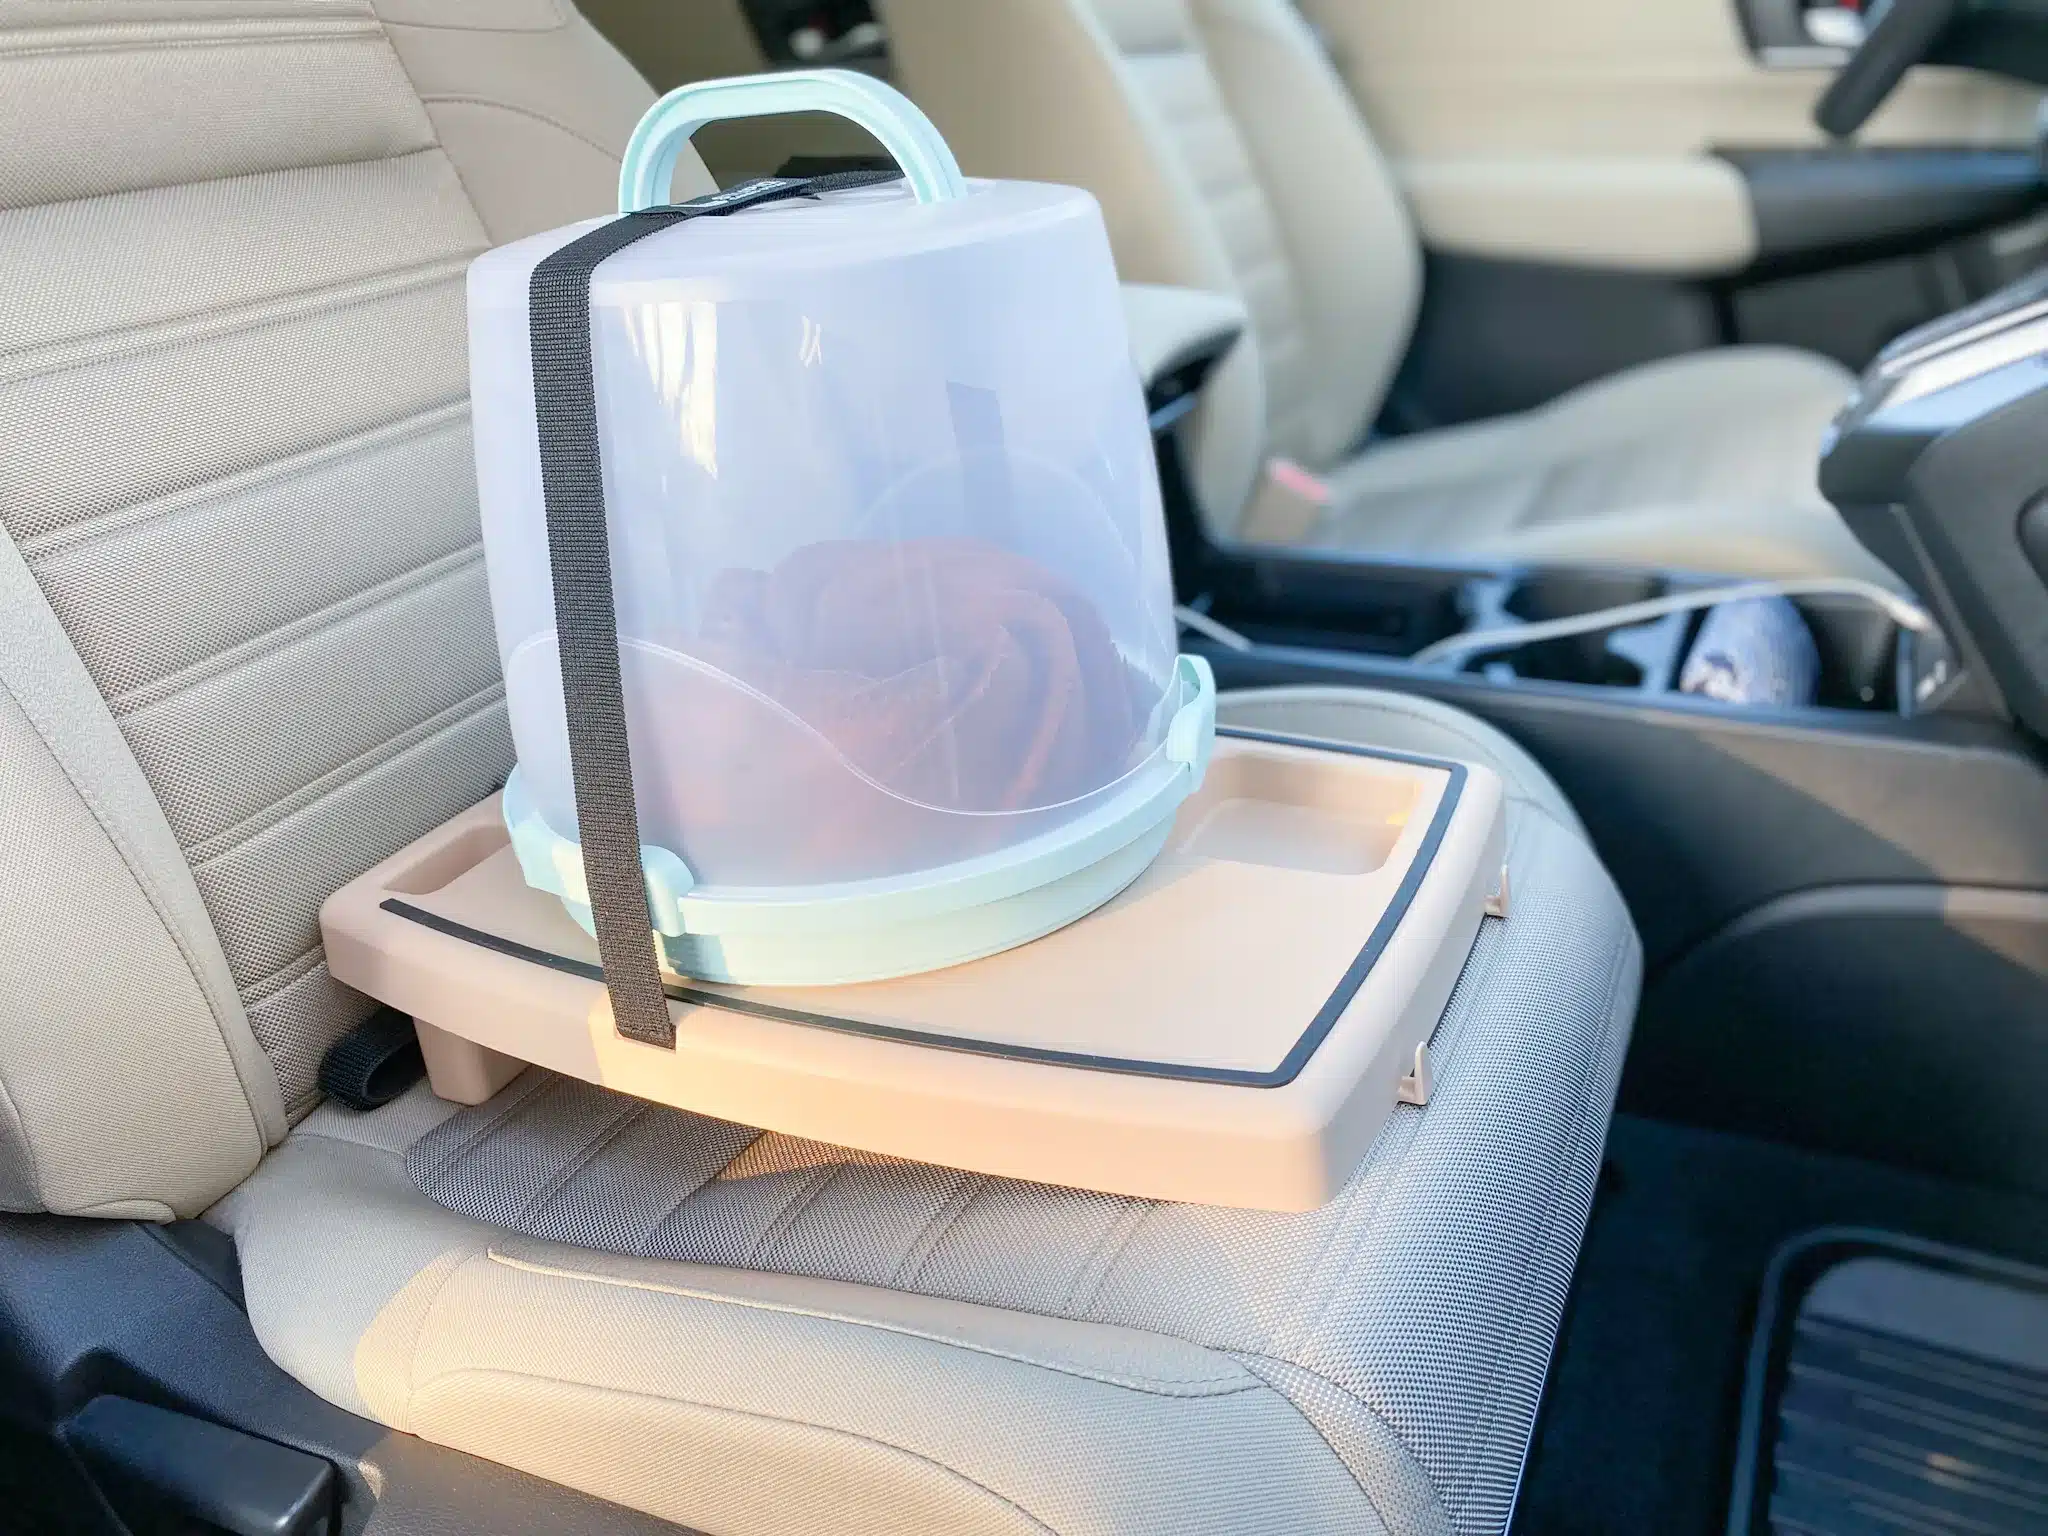 The Stupid Car Tray with tall cake carrier with Bundt cake